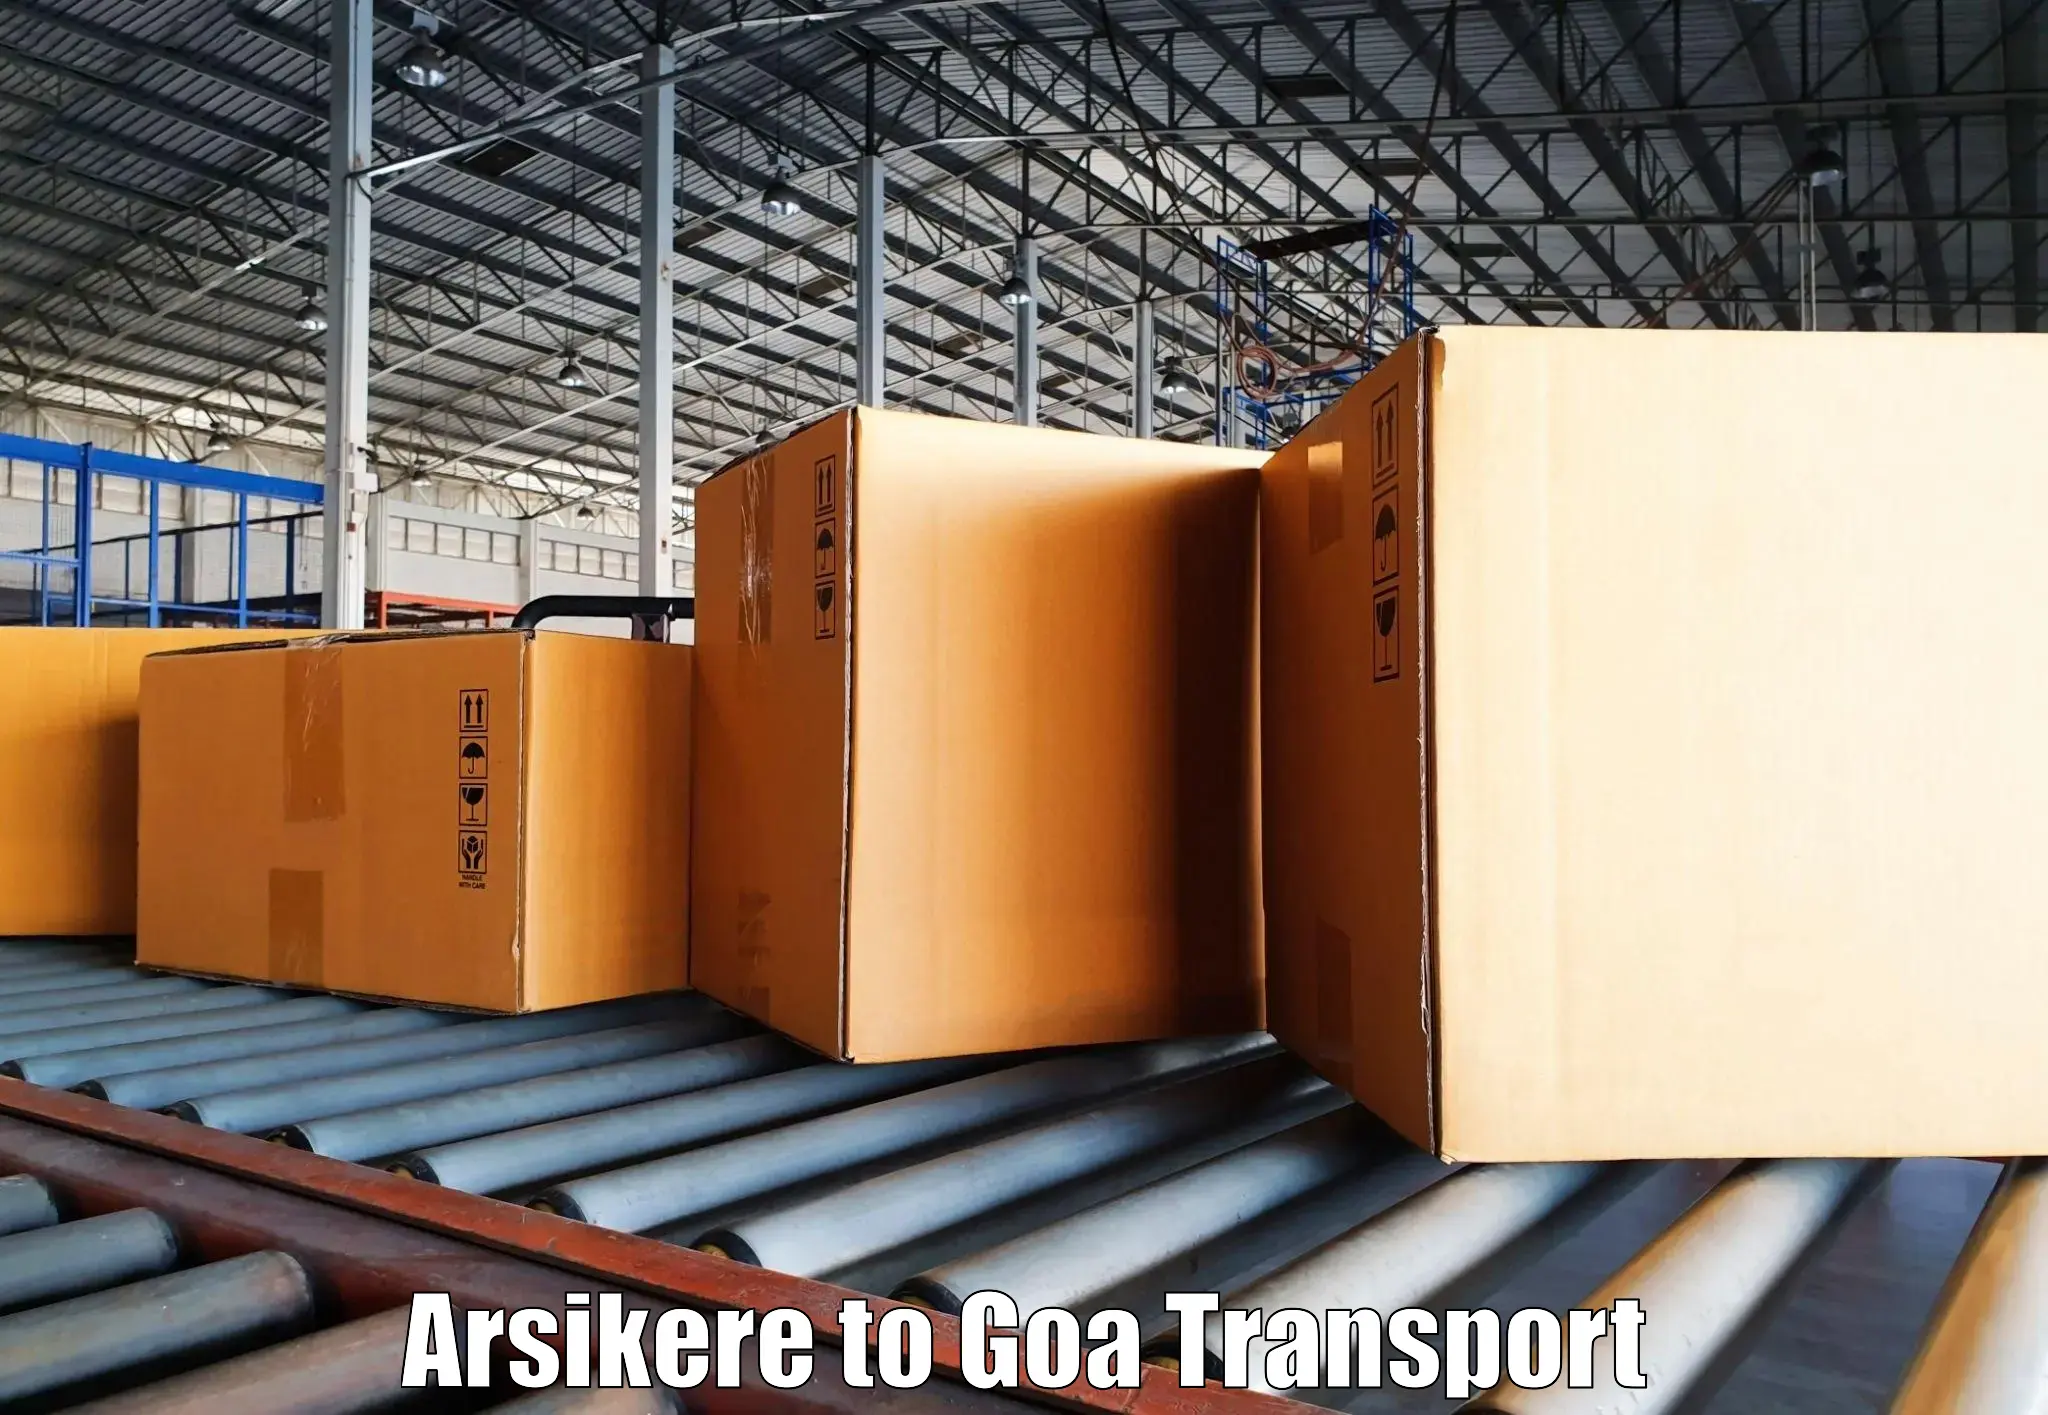 Two wheeler transport services Arsikere to Mormugao Port